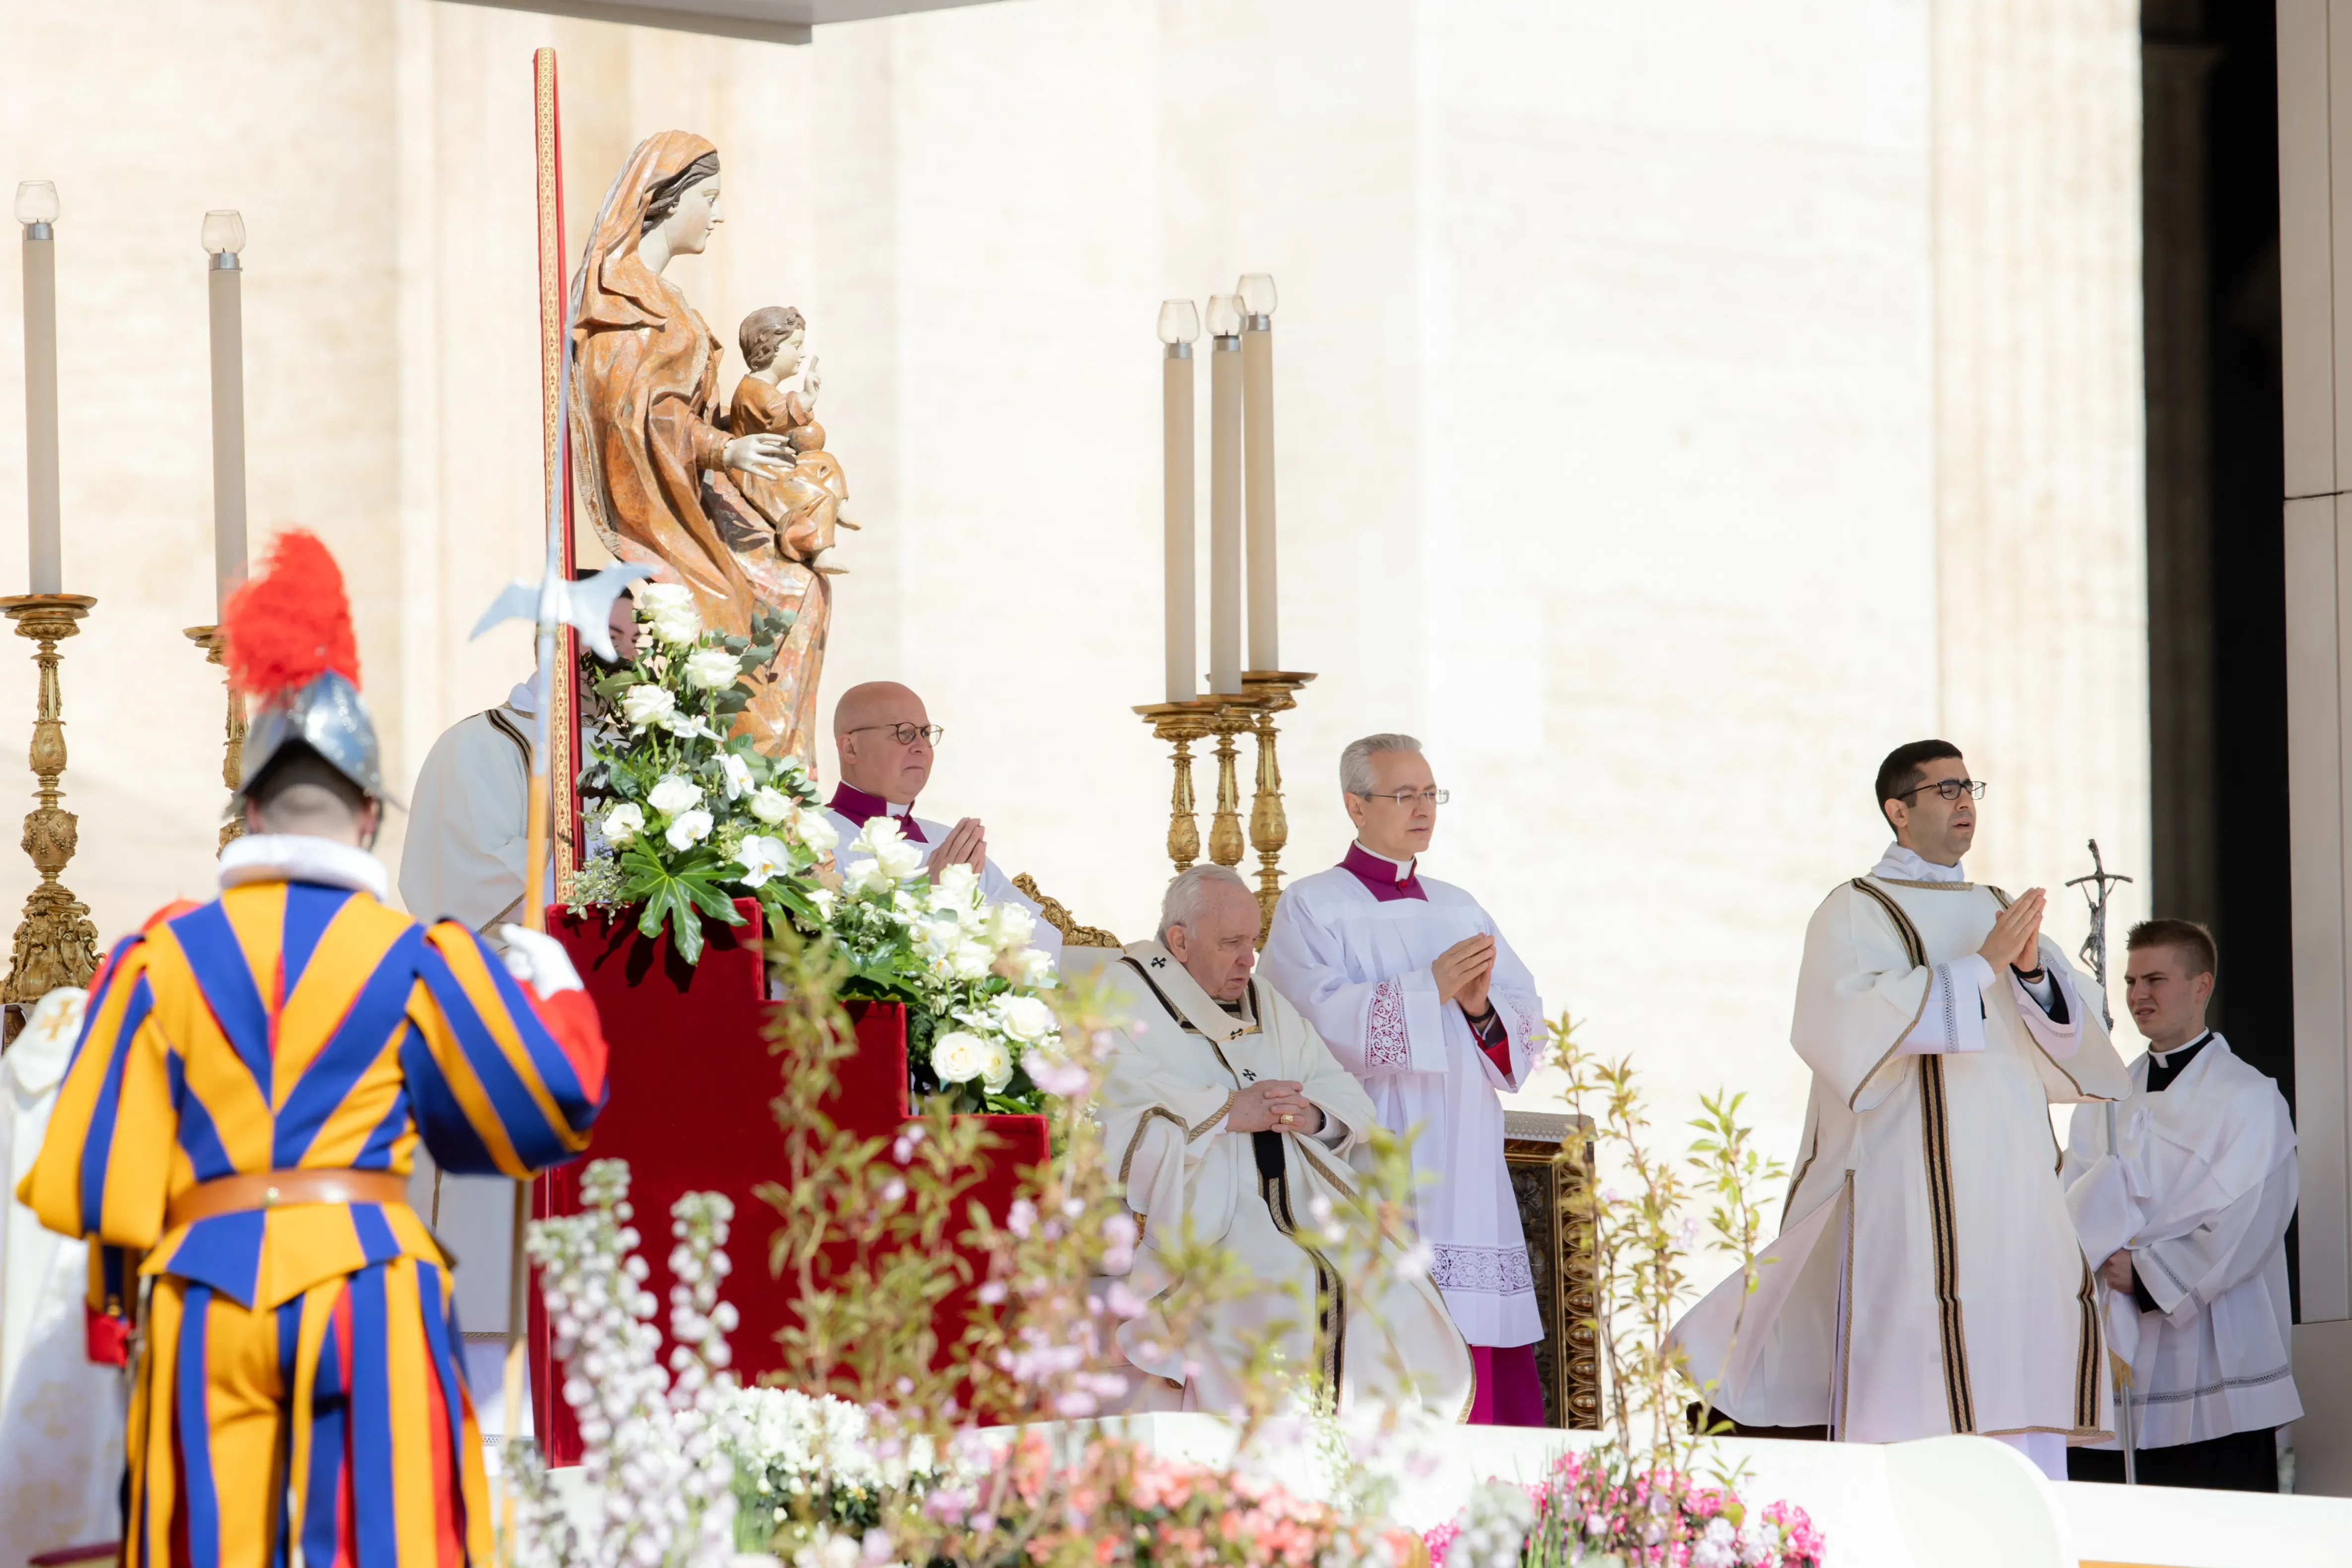 Pope Francis celebrates Mass in St. Peter's Square for Easter 2022. Daniel Ibanez/CNA